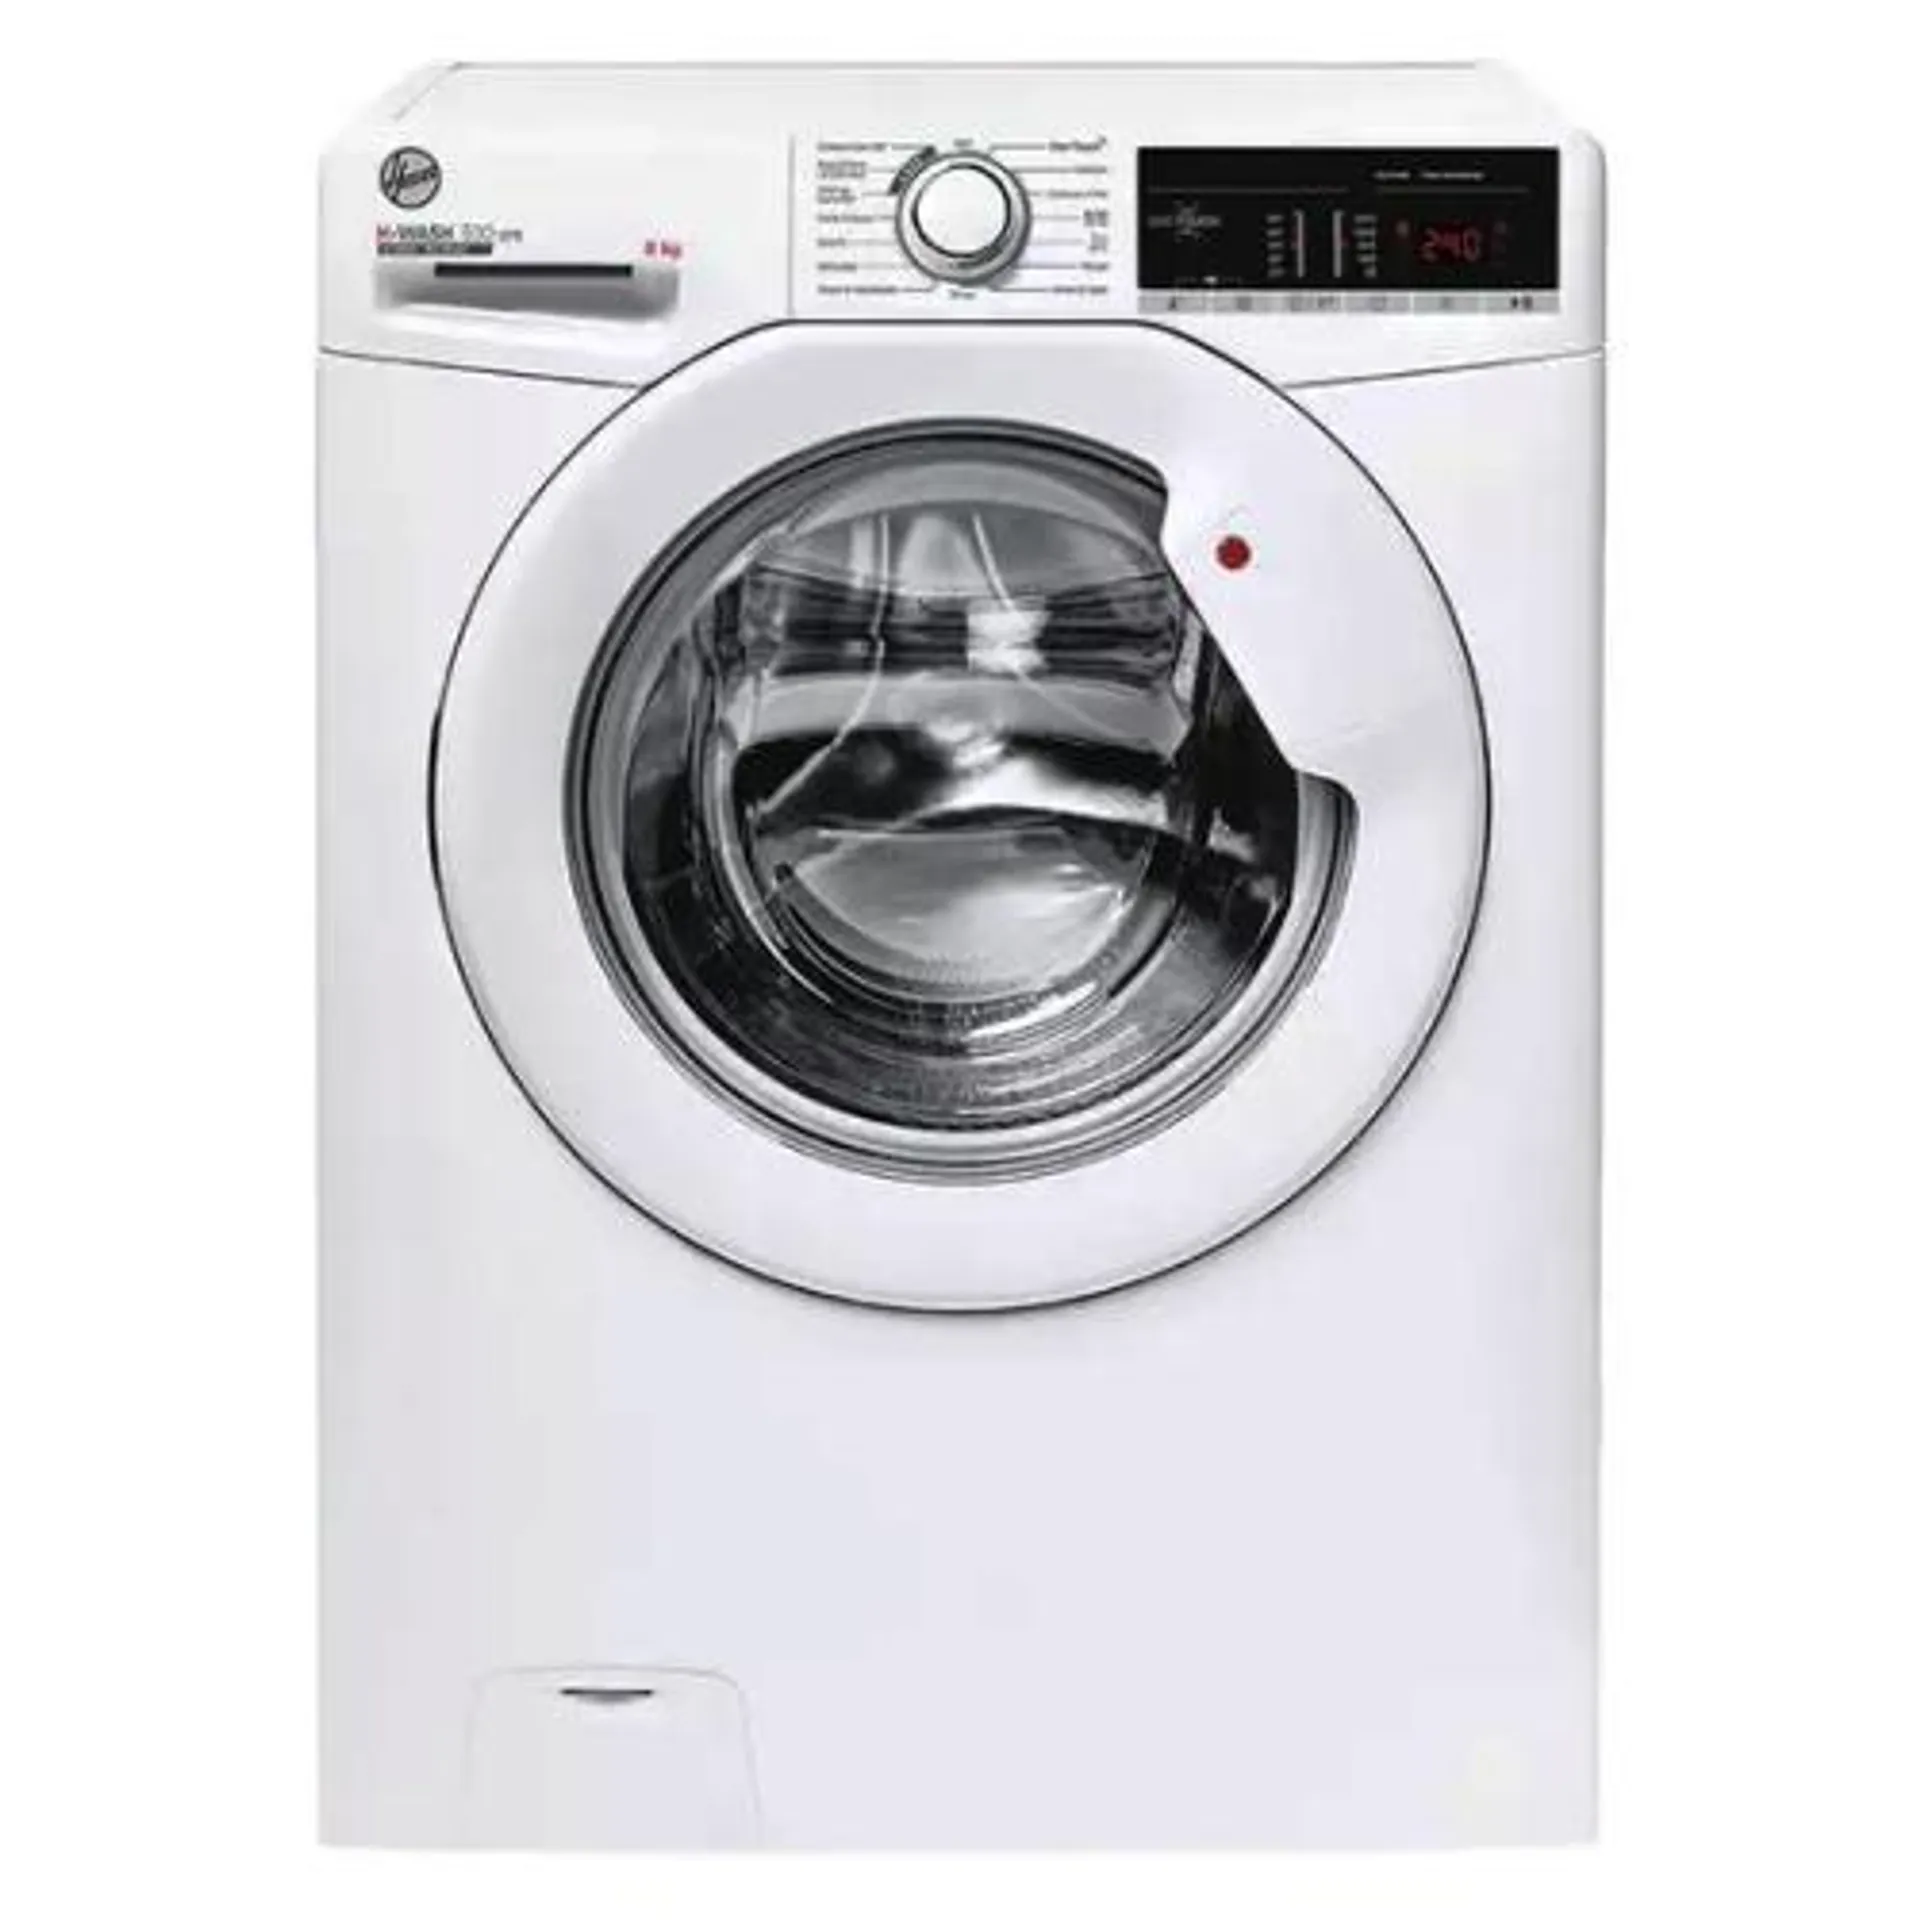 HOOVER 8KG 1400 SPIN WASHING MACHINE - B ENERGY RATING